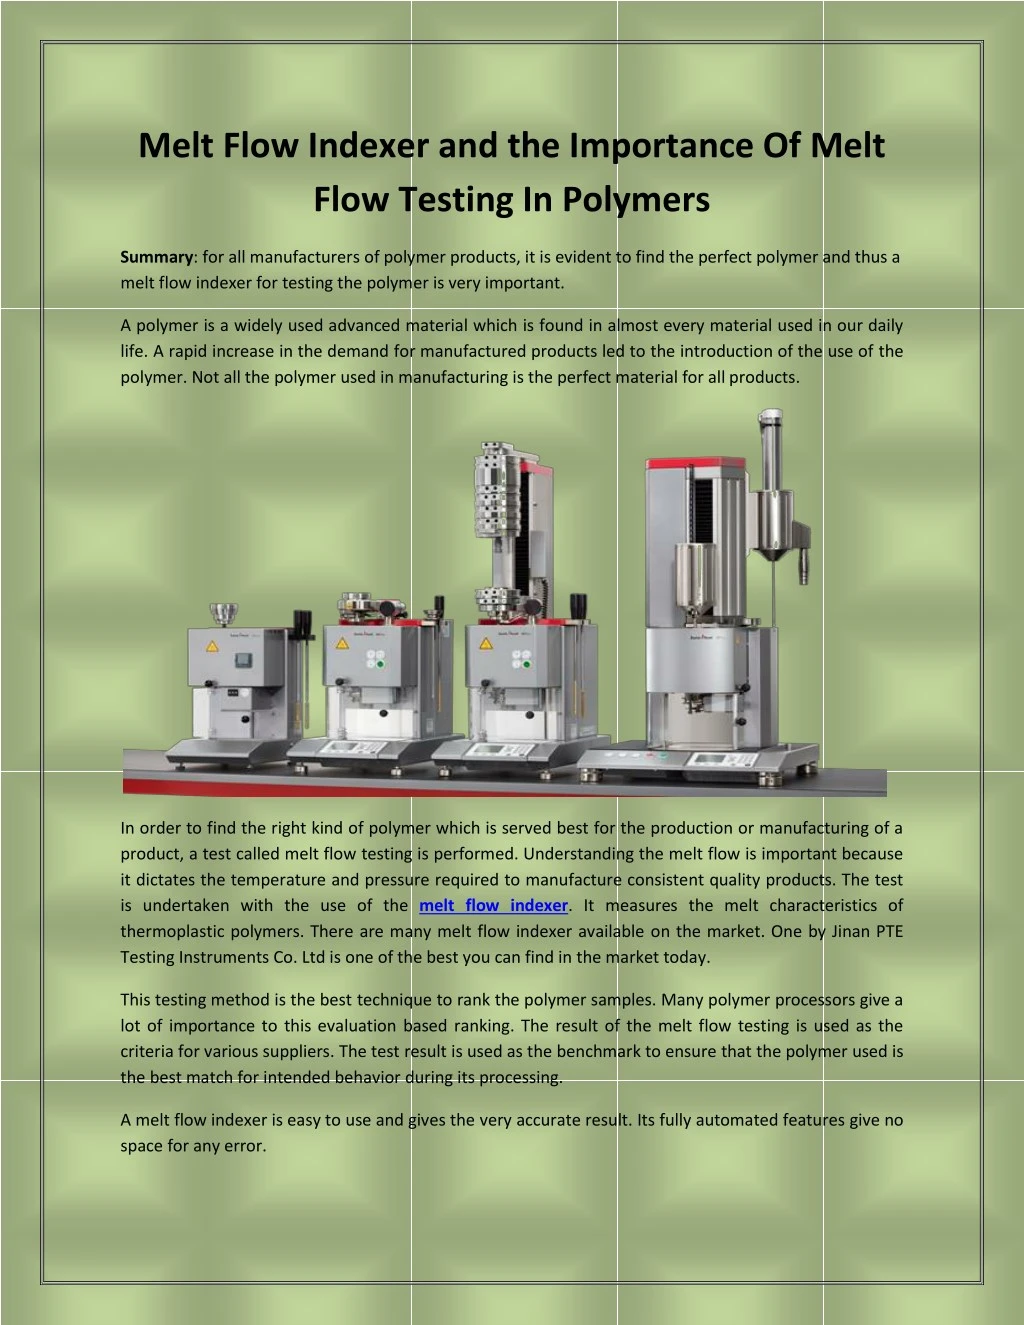 melt flow indexer and the importance of melt flow